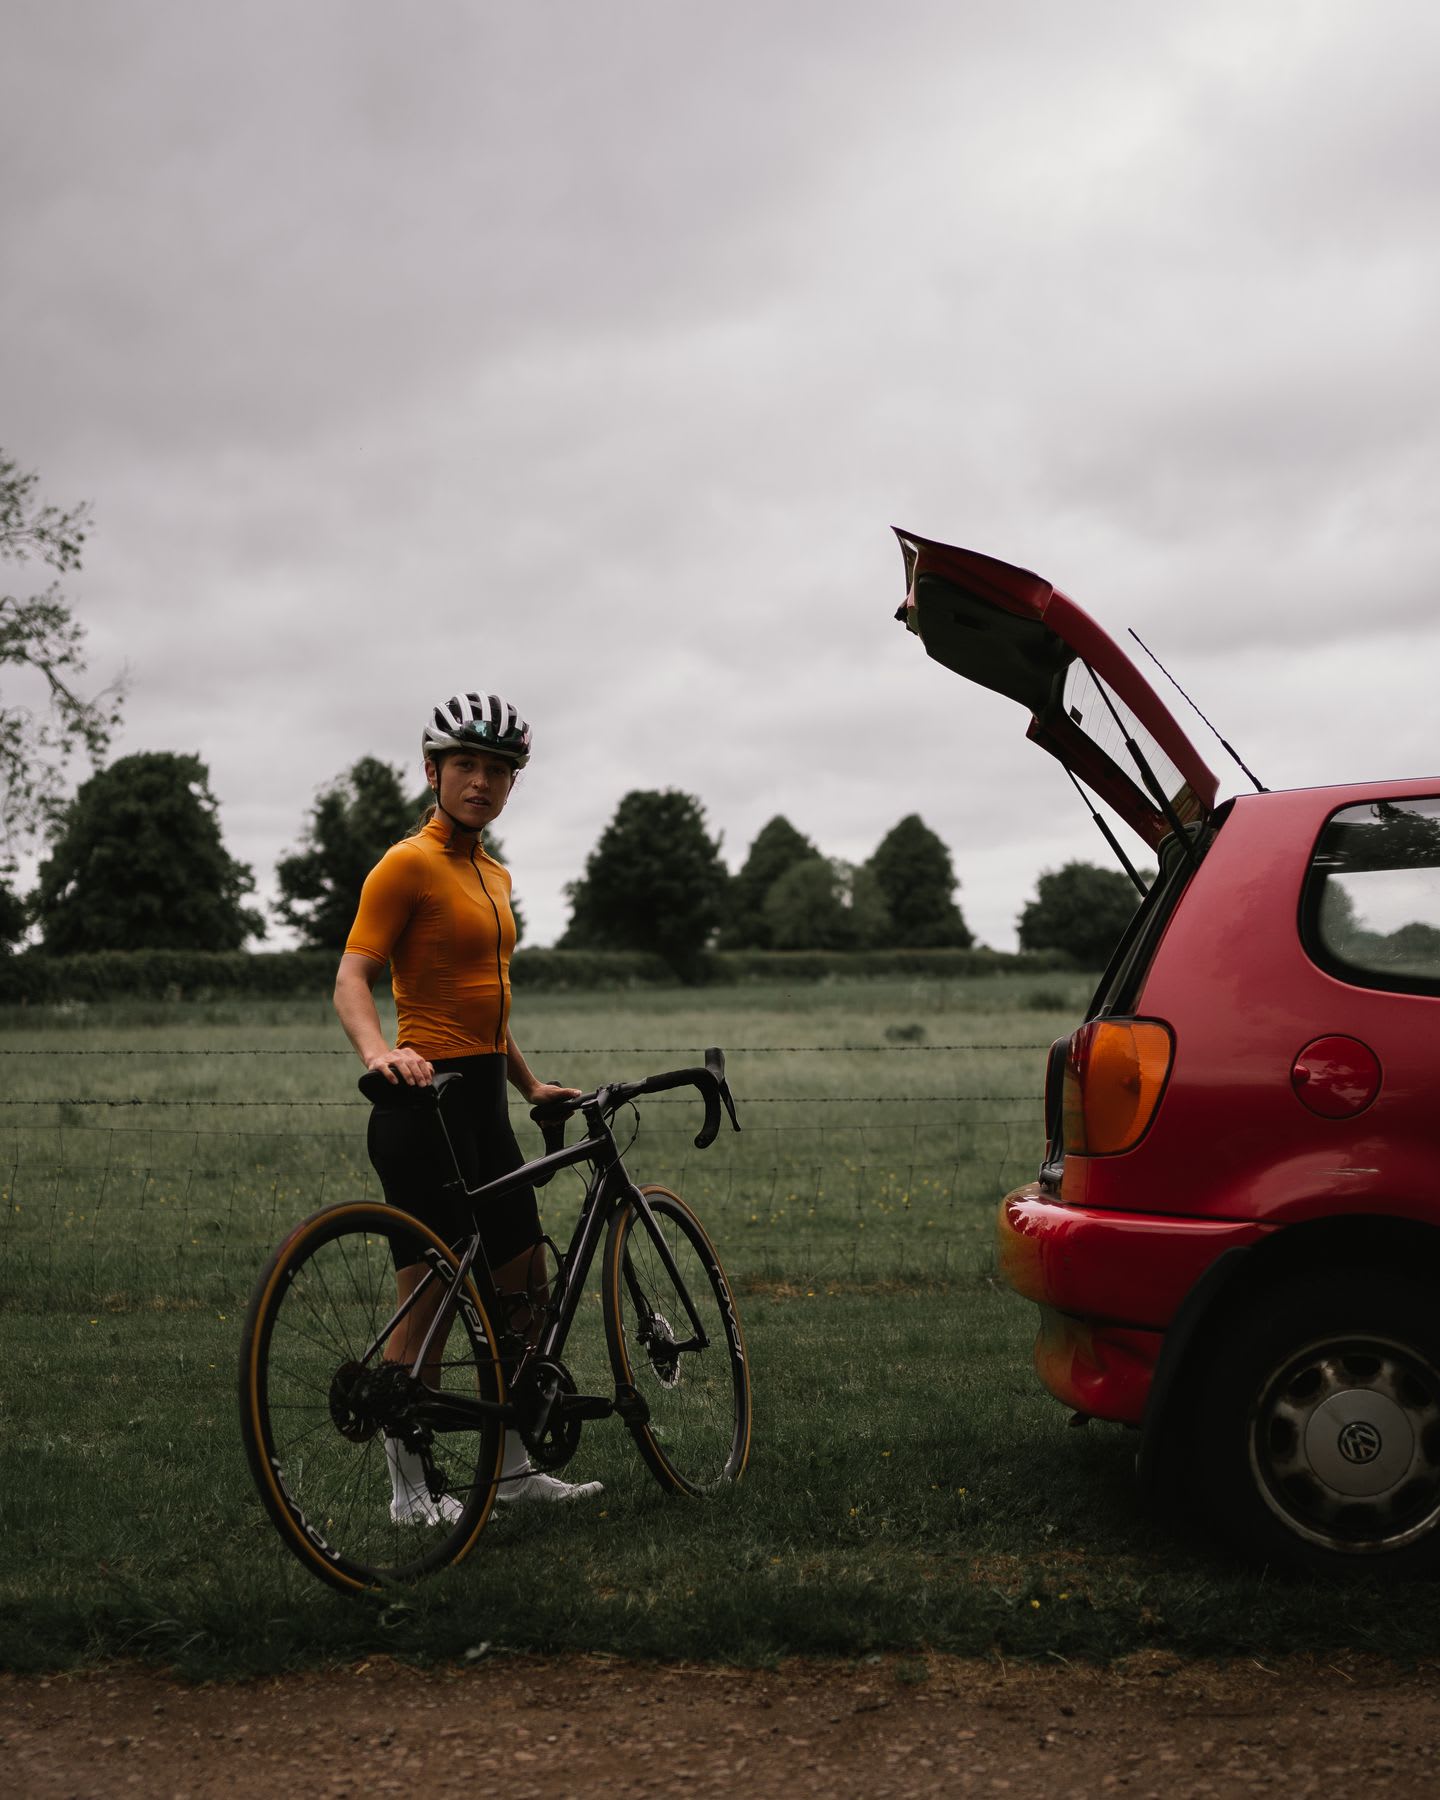 A biker in a white helmet pauses by her bike and a red car with its trunk open, on a grassy field under cloudy skies.